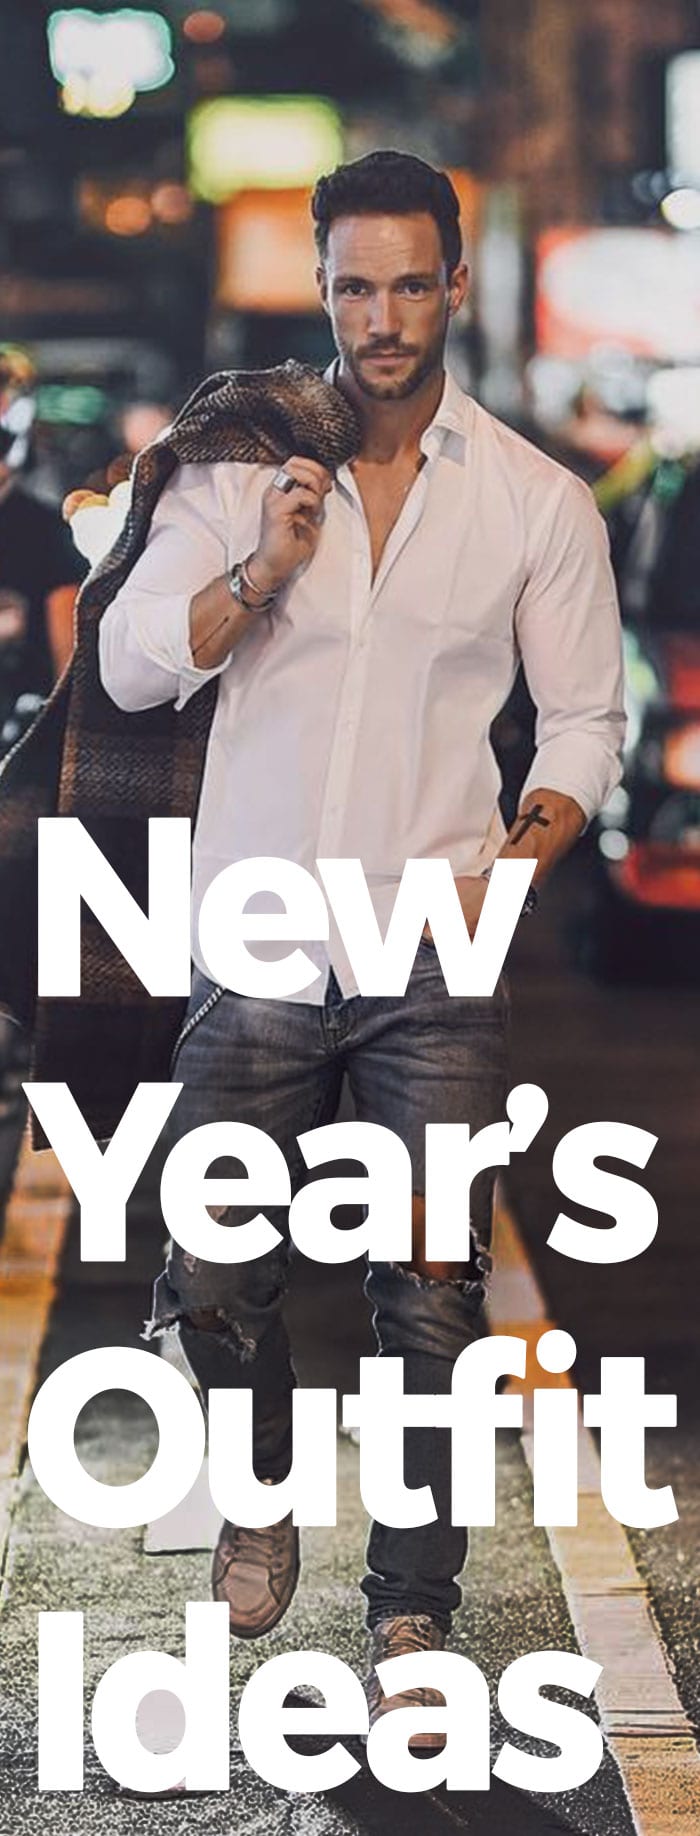 New Year's Outfit Ideas For Men